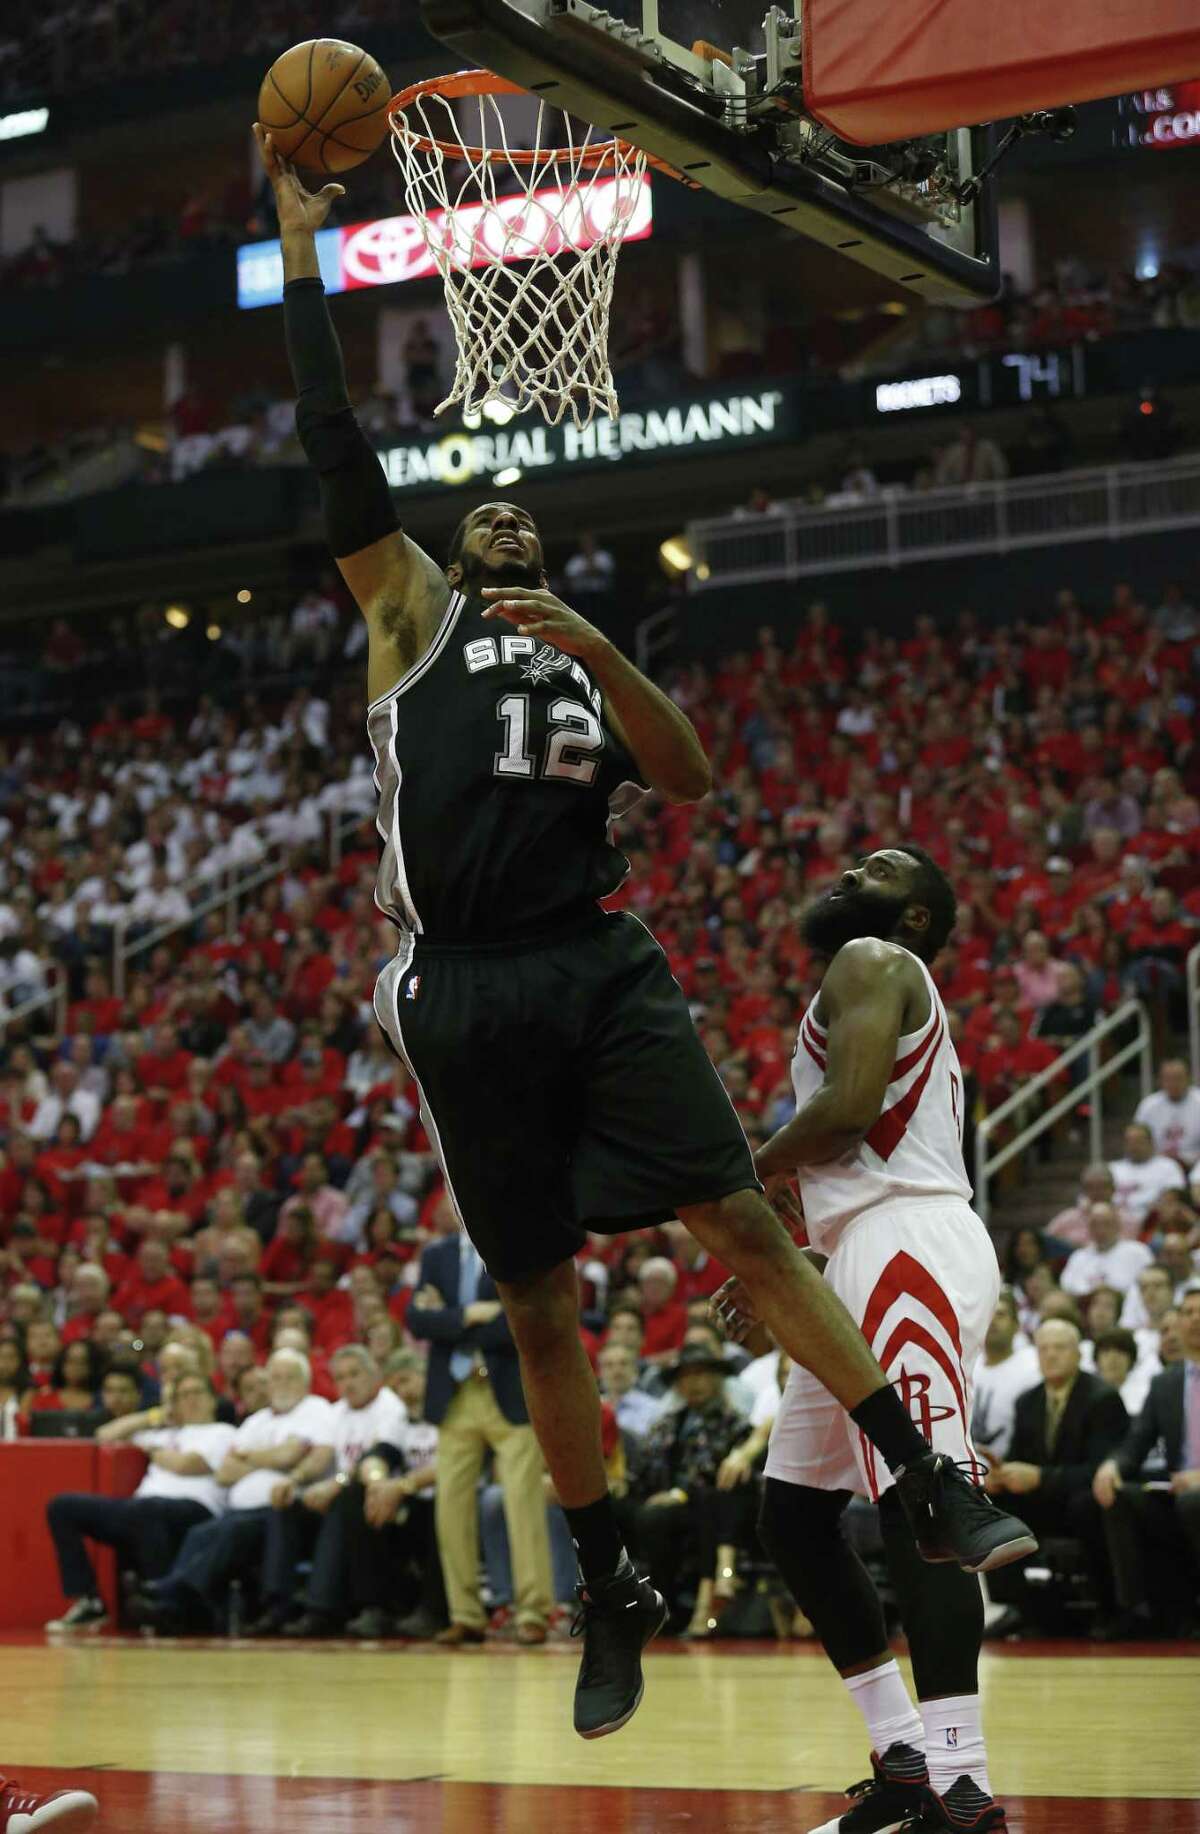 Spurs' LaMarcus Aldridge (12) scores against Houston Rockets' James Harden (13) in Game 3 at the Toyota Center on Friday, May 5, 2017. (Kin Man Hui/San Antonio Express-News)